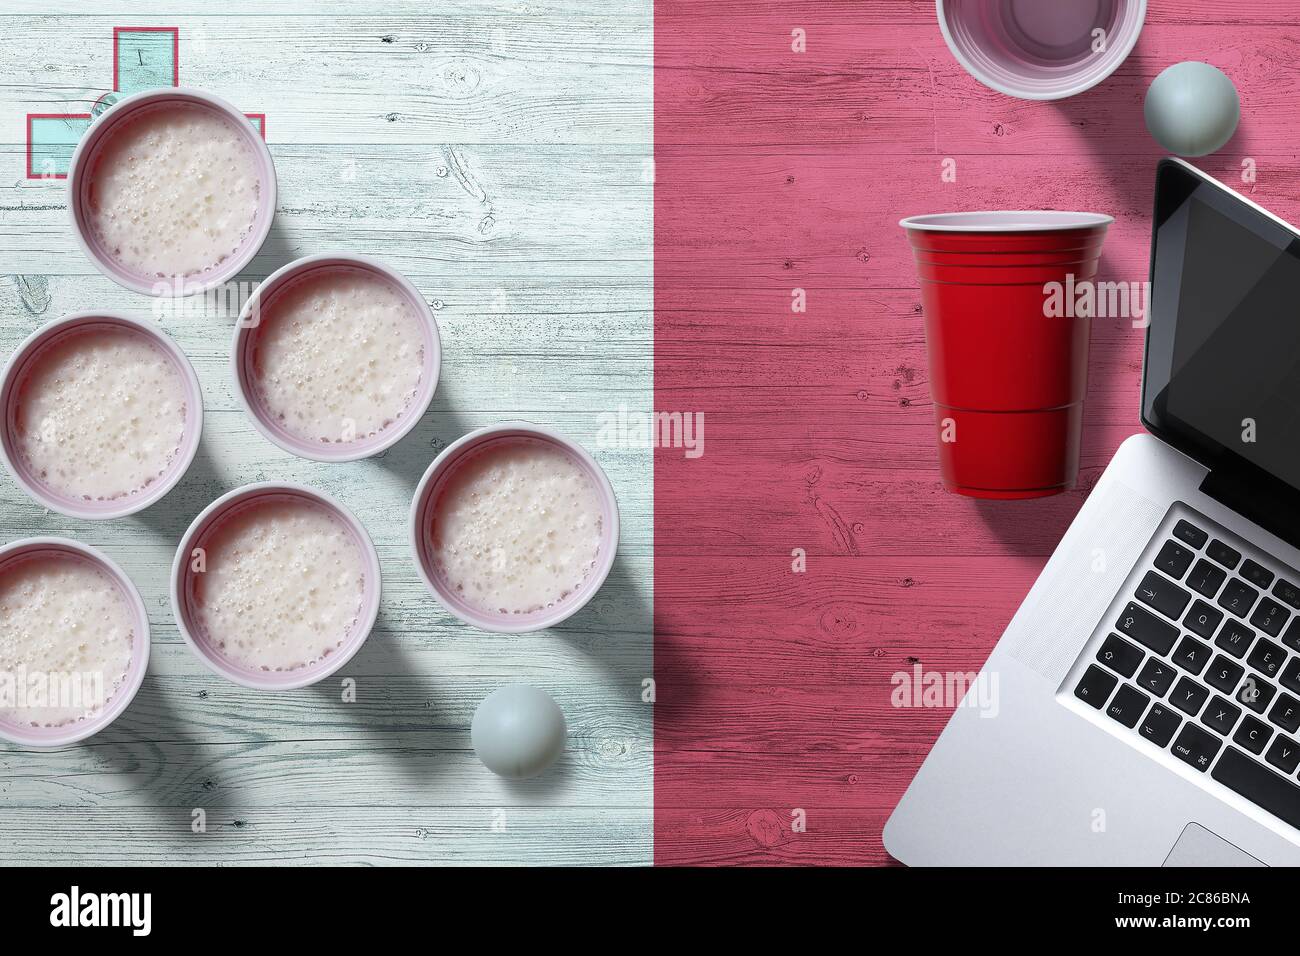 Malta flag concept with plastic beer pong cups and laptop on national wooden table, top view. Beer Pong game. Stock Photo